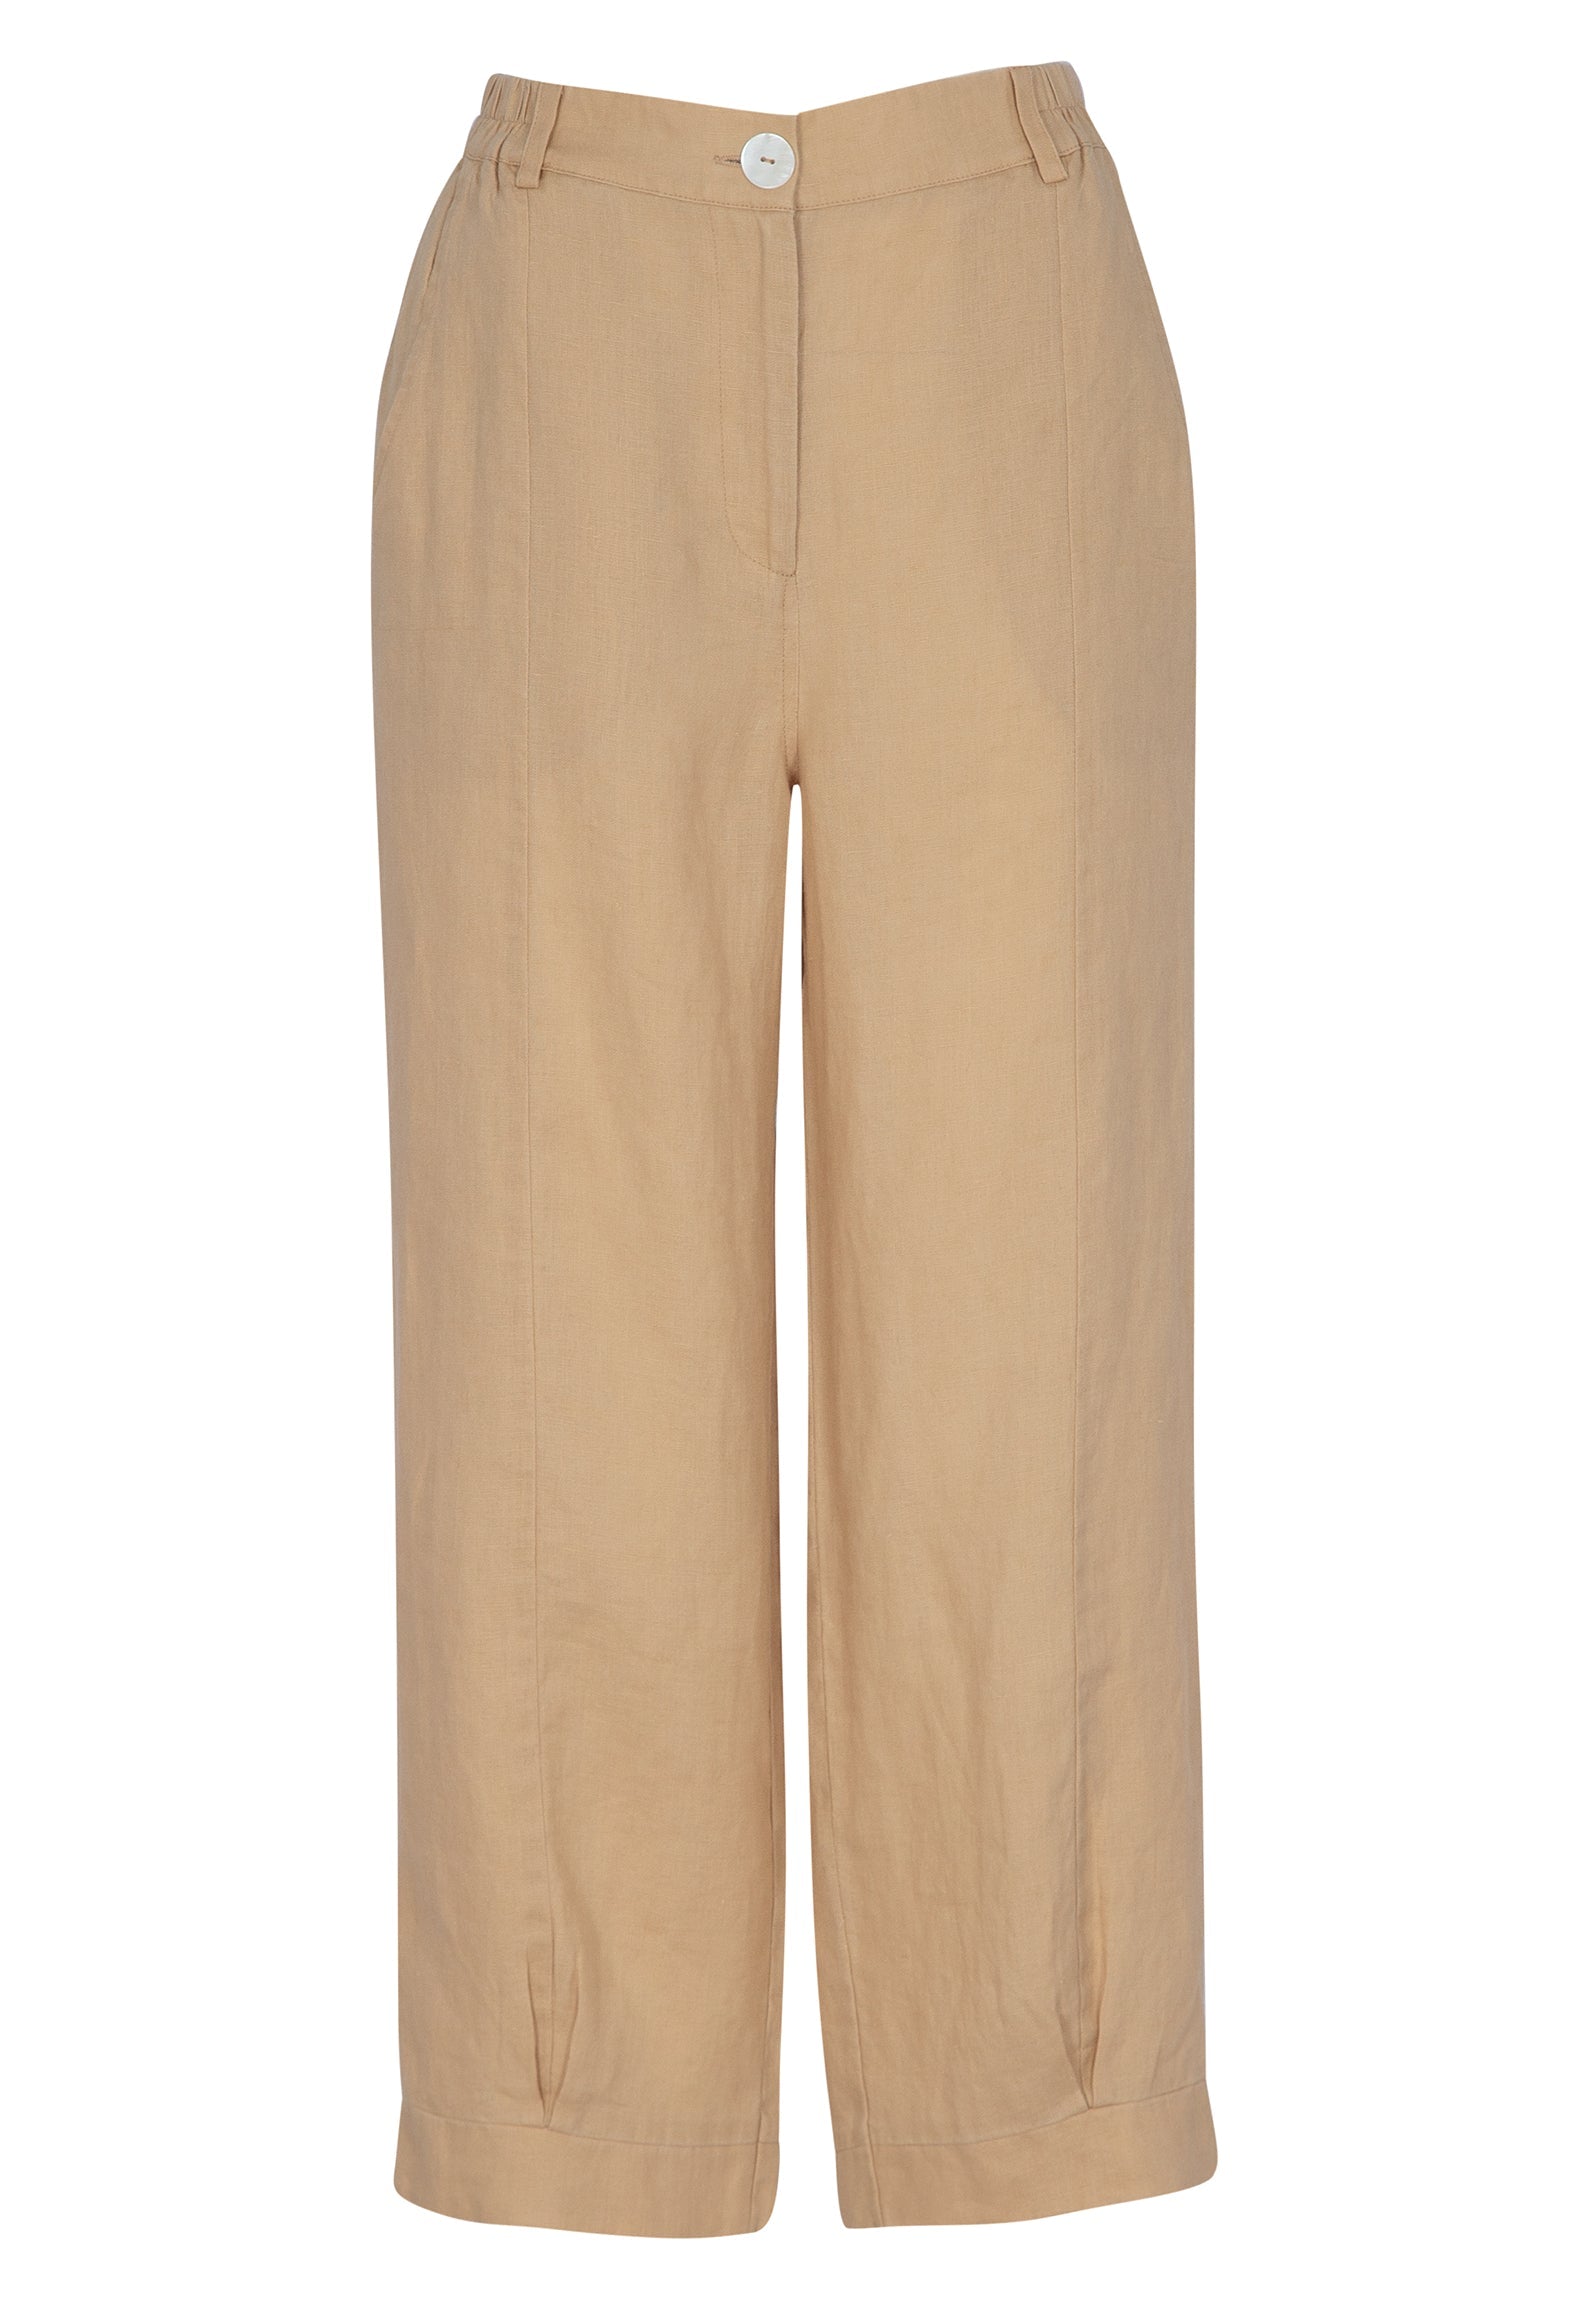 Hadley Pant - Biscuit-Pants-By RIDLEY-The Bay Room